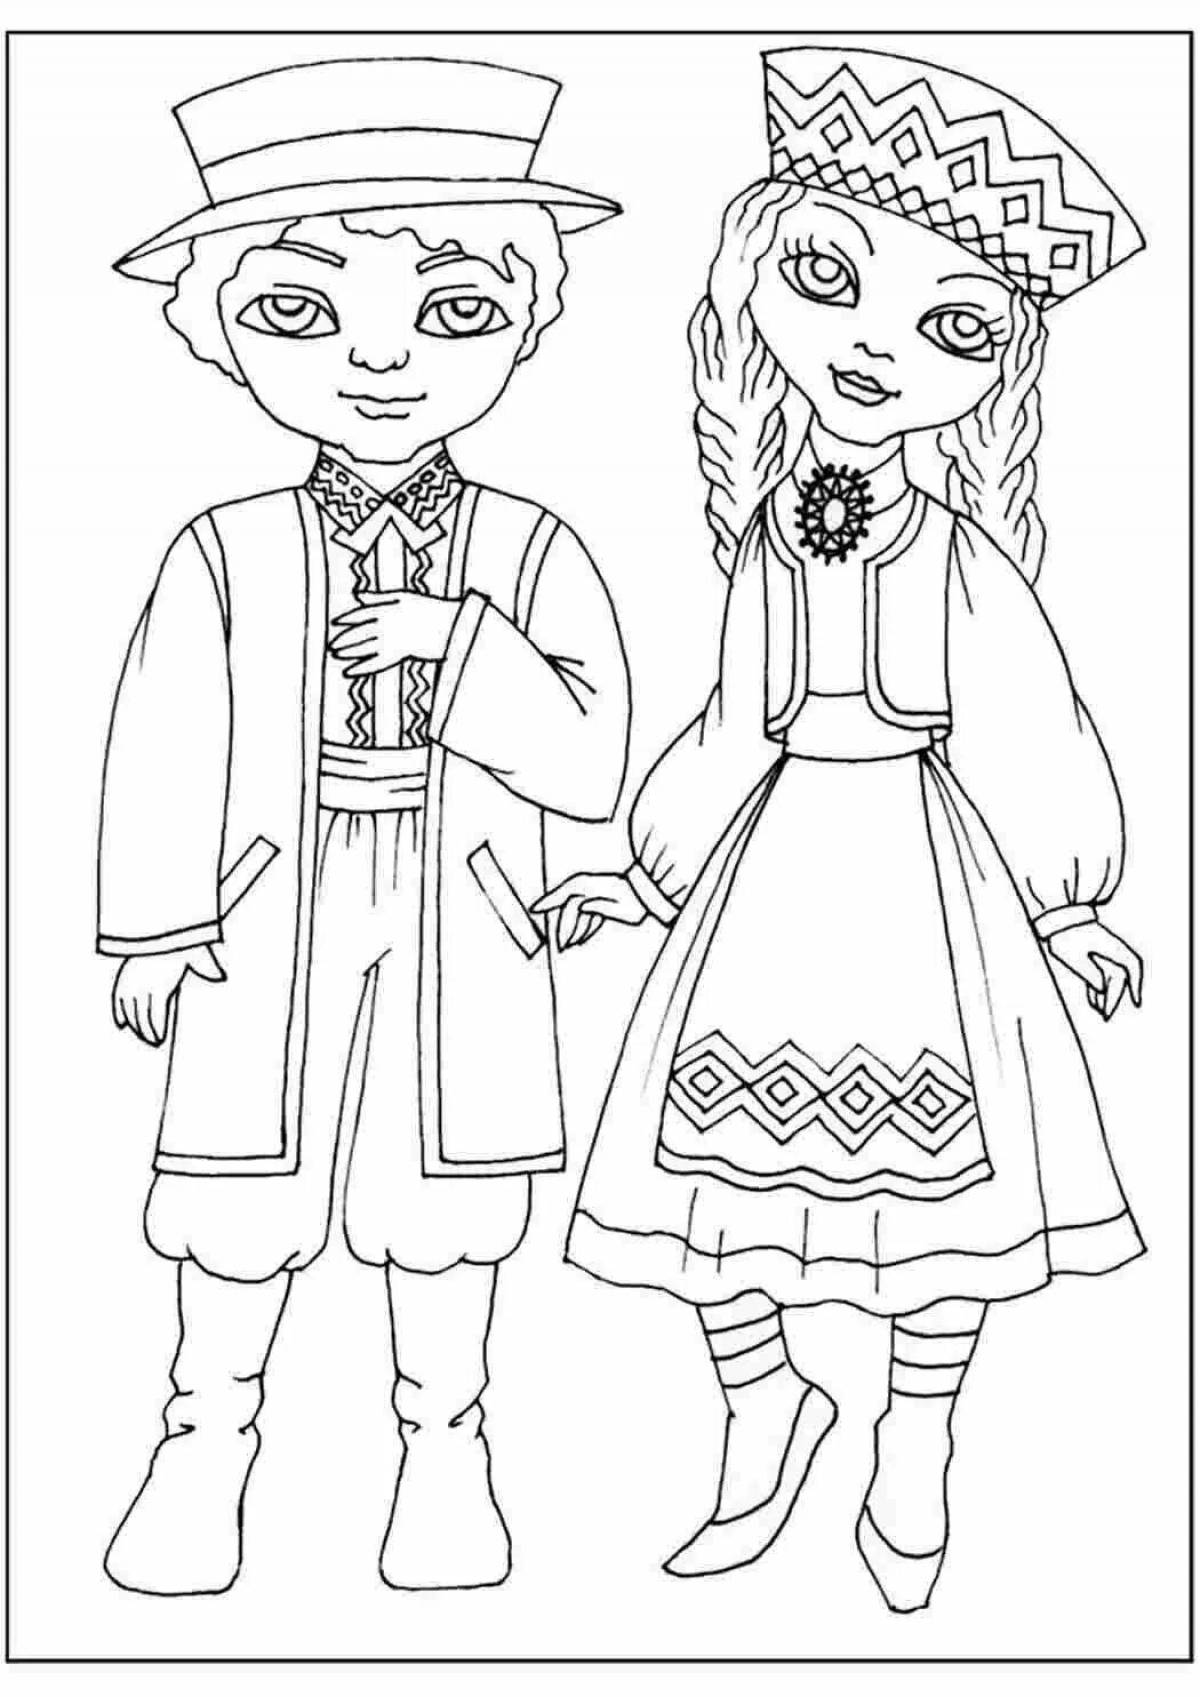 Modern belarusian clothes coloring pages for kids